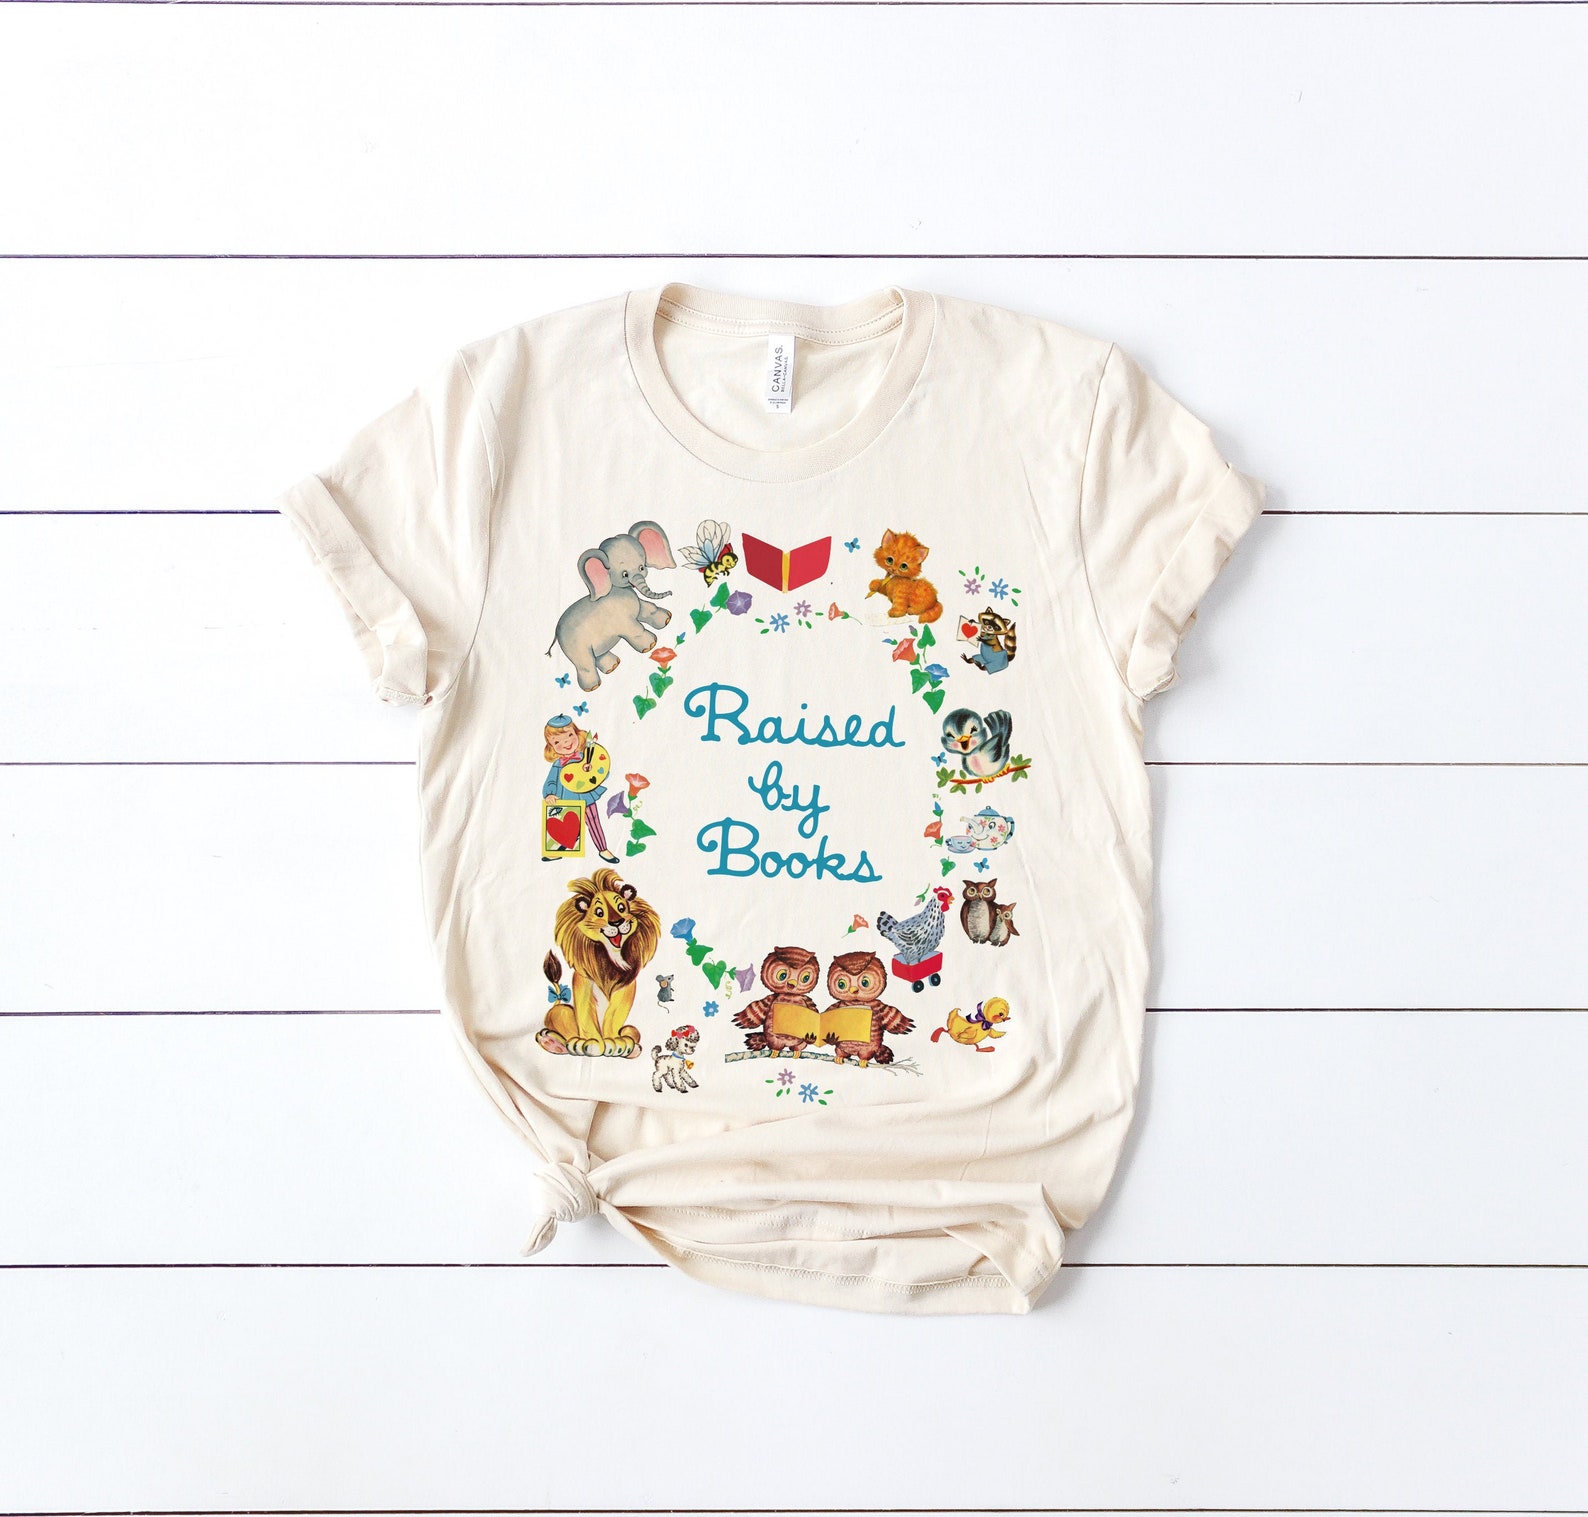 Image of a white shirt on a white paneled background. The shirt reads "Raised by Books" and features images from Little Golden Books. 